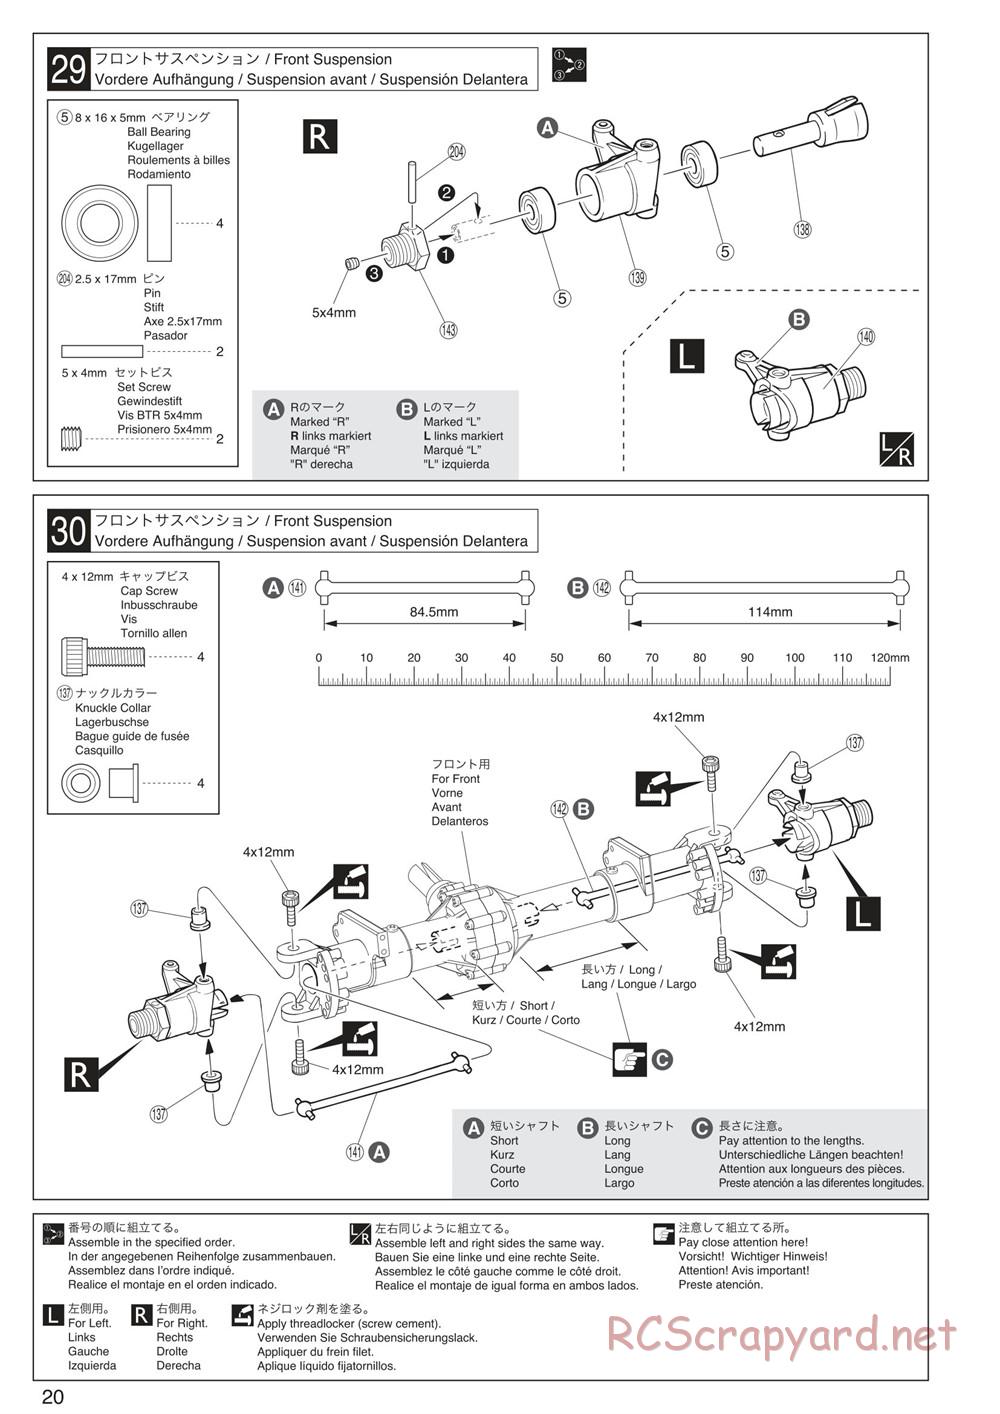 Kyosho - Mad Crusher VE - Manual - Page 20